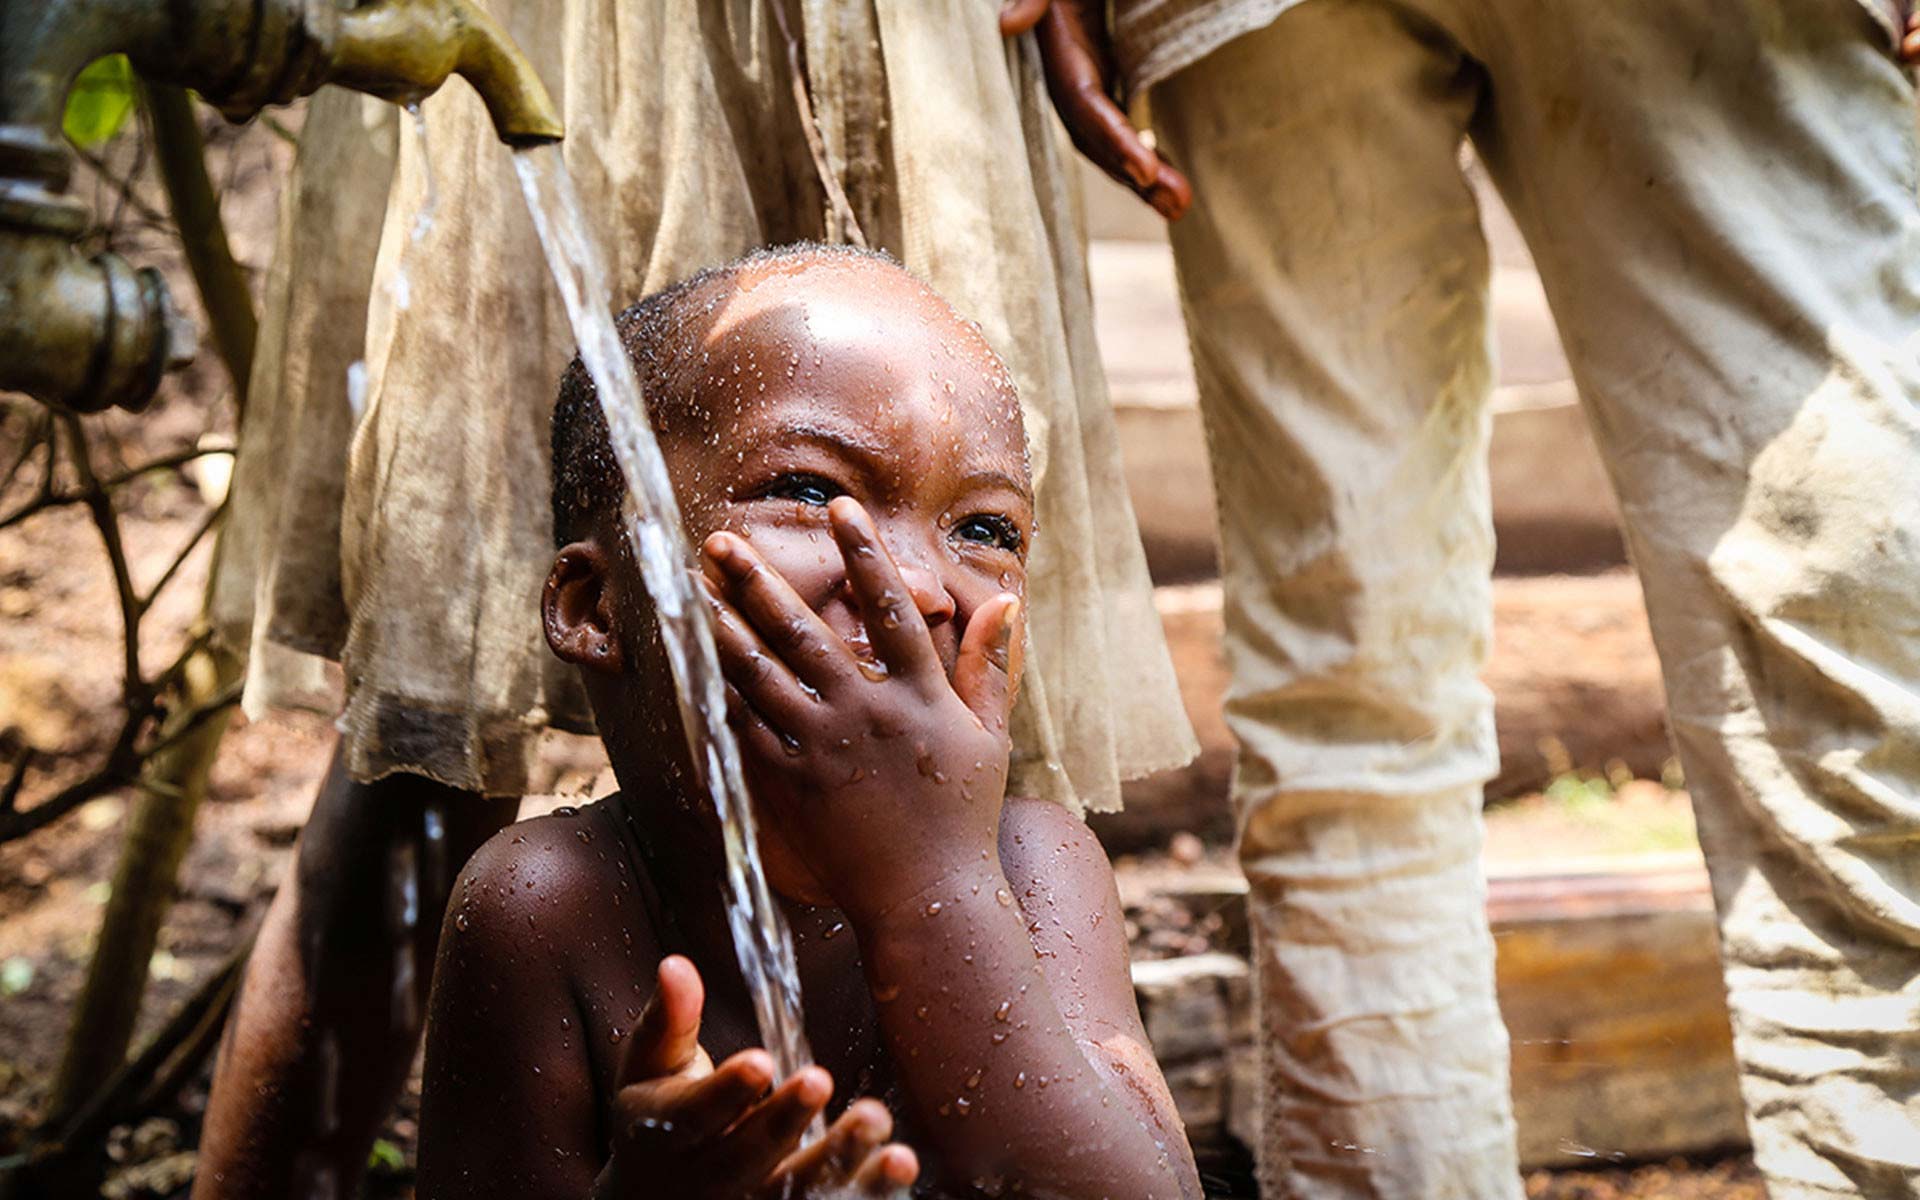 A young boy drinking clean water